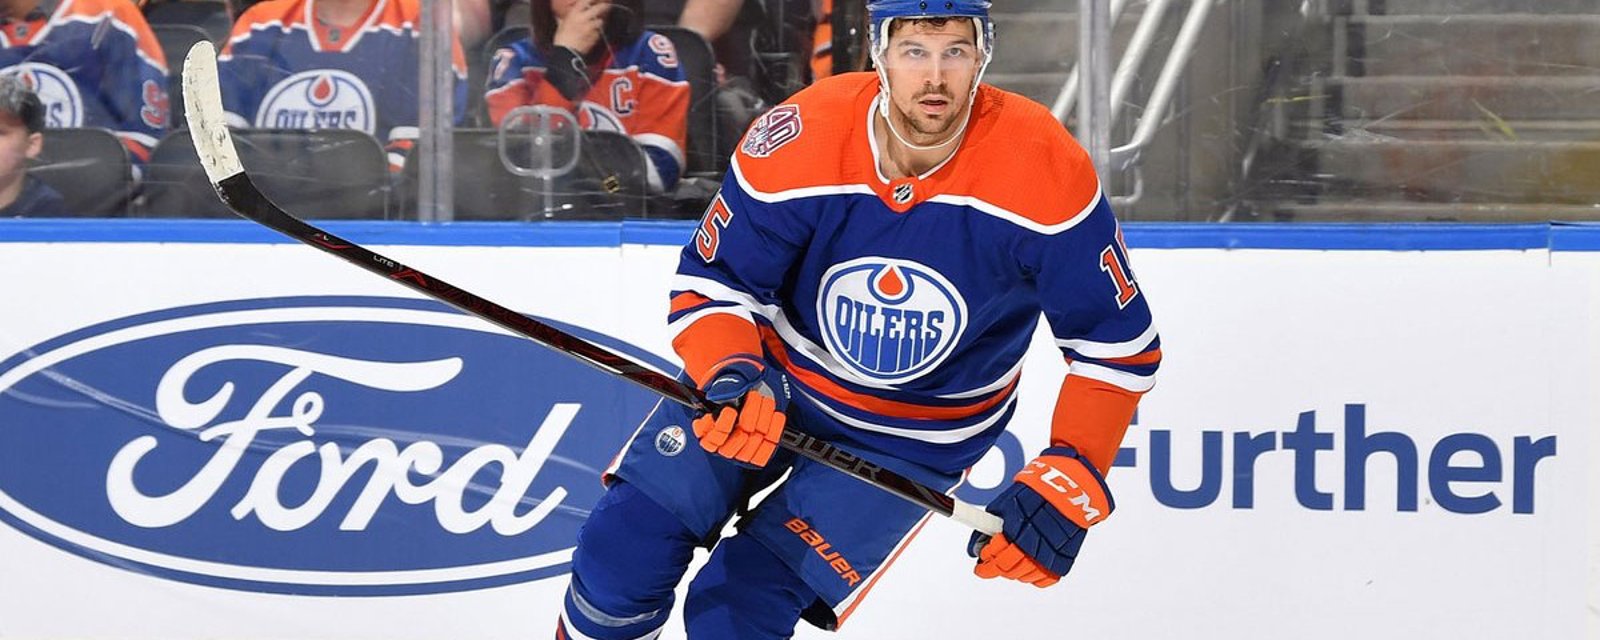 No team wants to make a trade with the Oilers as deadline fast approaches 